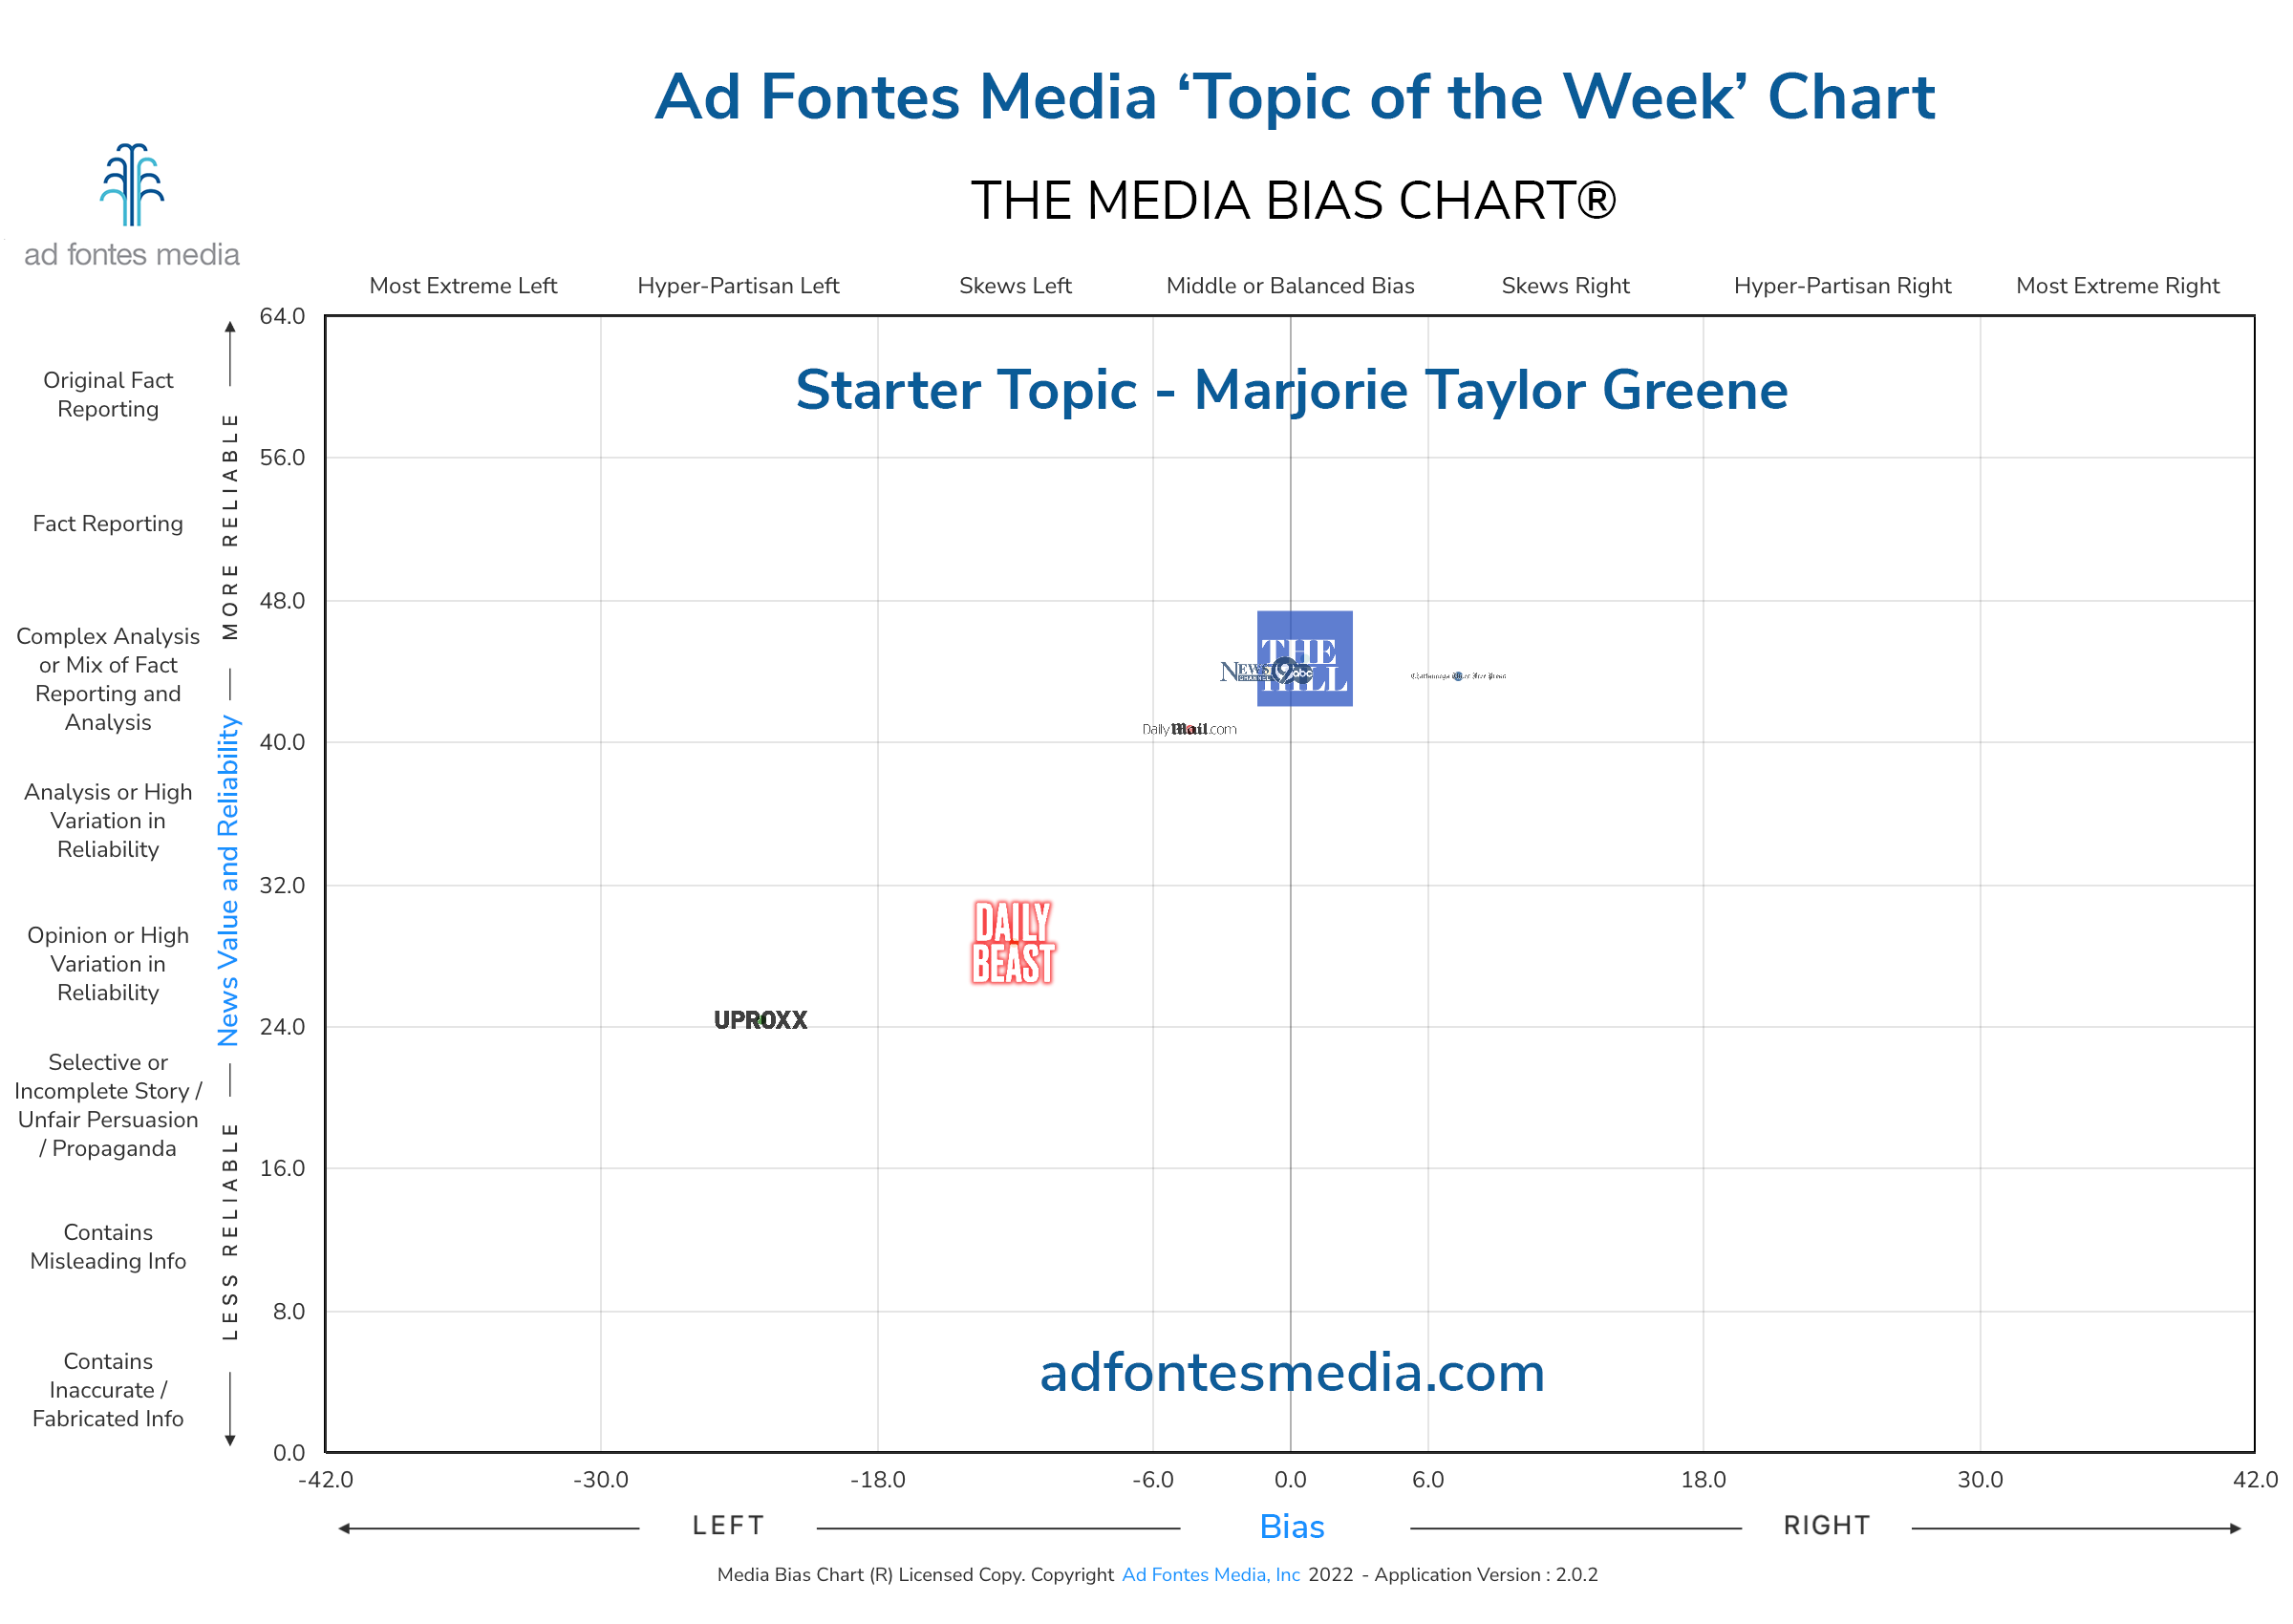 Scores of the Marjorie Taylor Greene articles on the chart